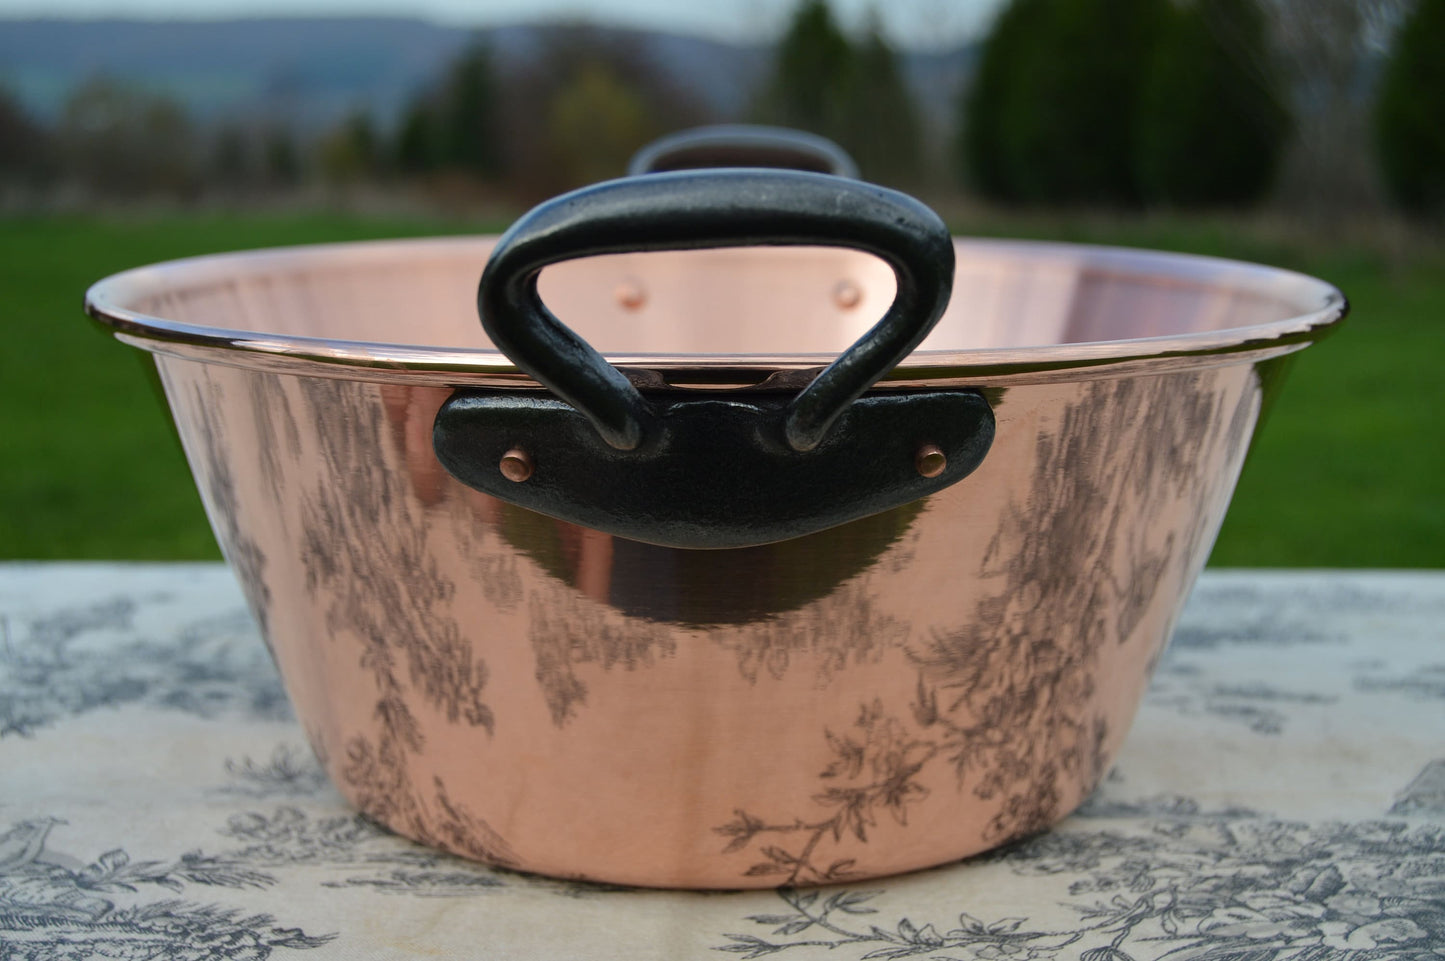 New NKC 28cm Copper Jam Pan Set Ecumoire and Louche NKC Normandy Kitchen Copper Jam Jelly 28cm 11" Rolled Top Iron Handles Skimmer Ladle